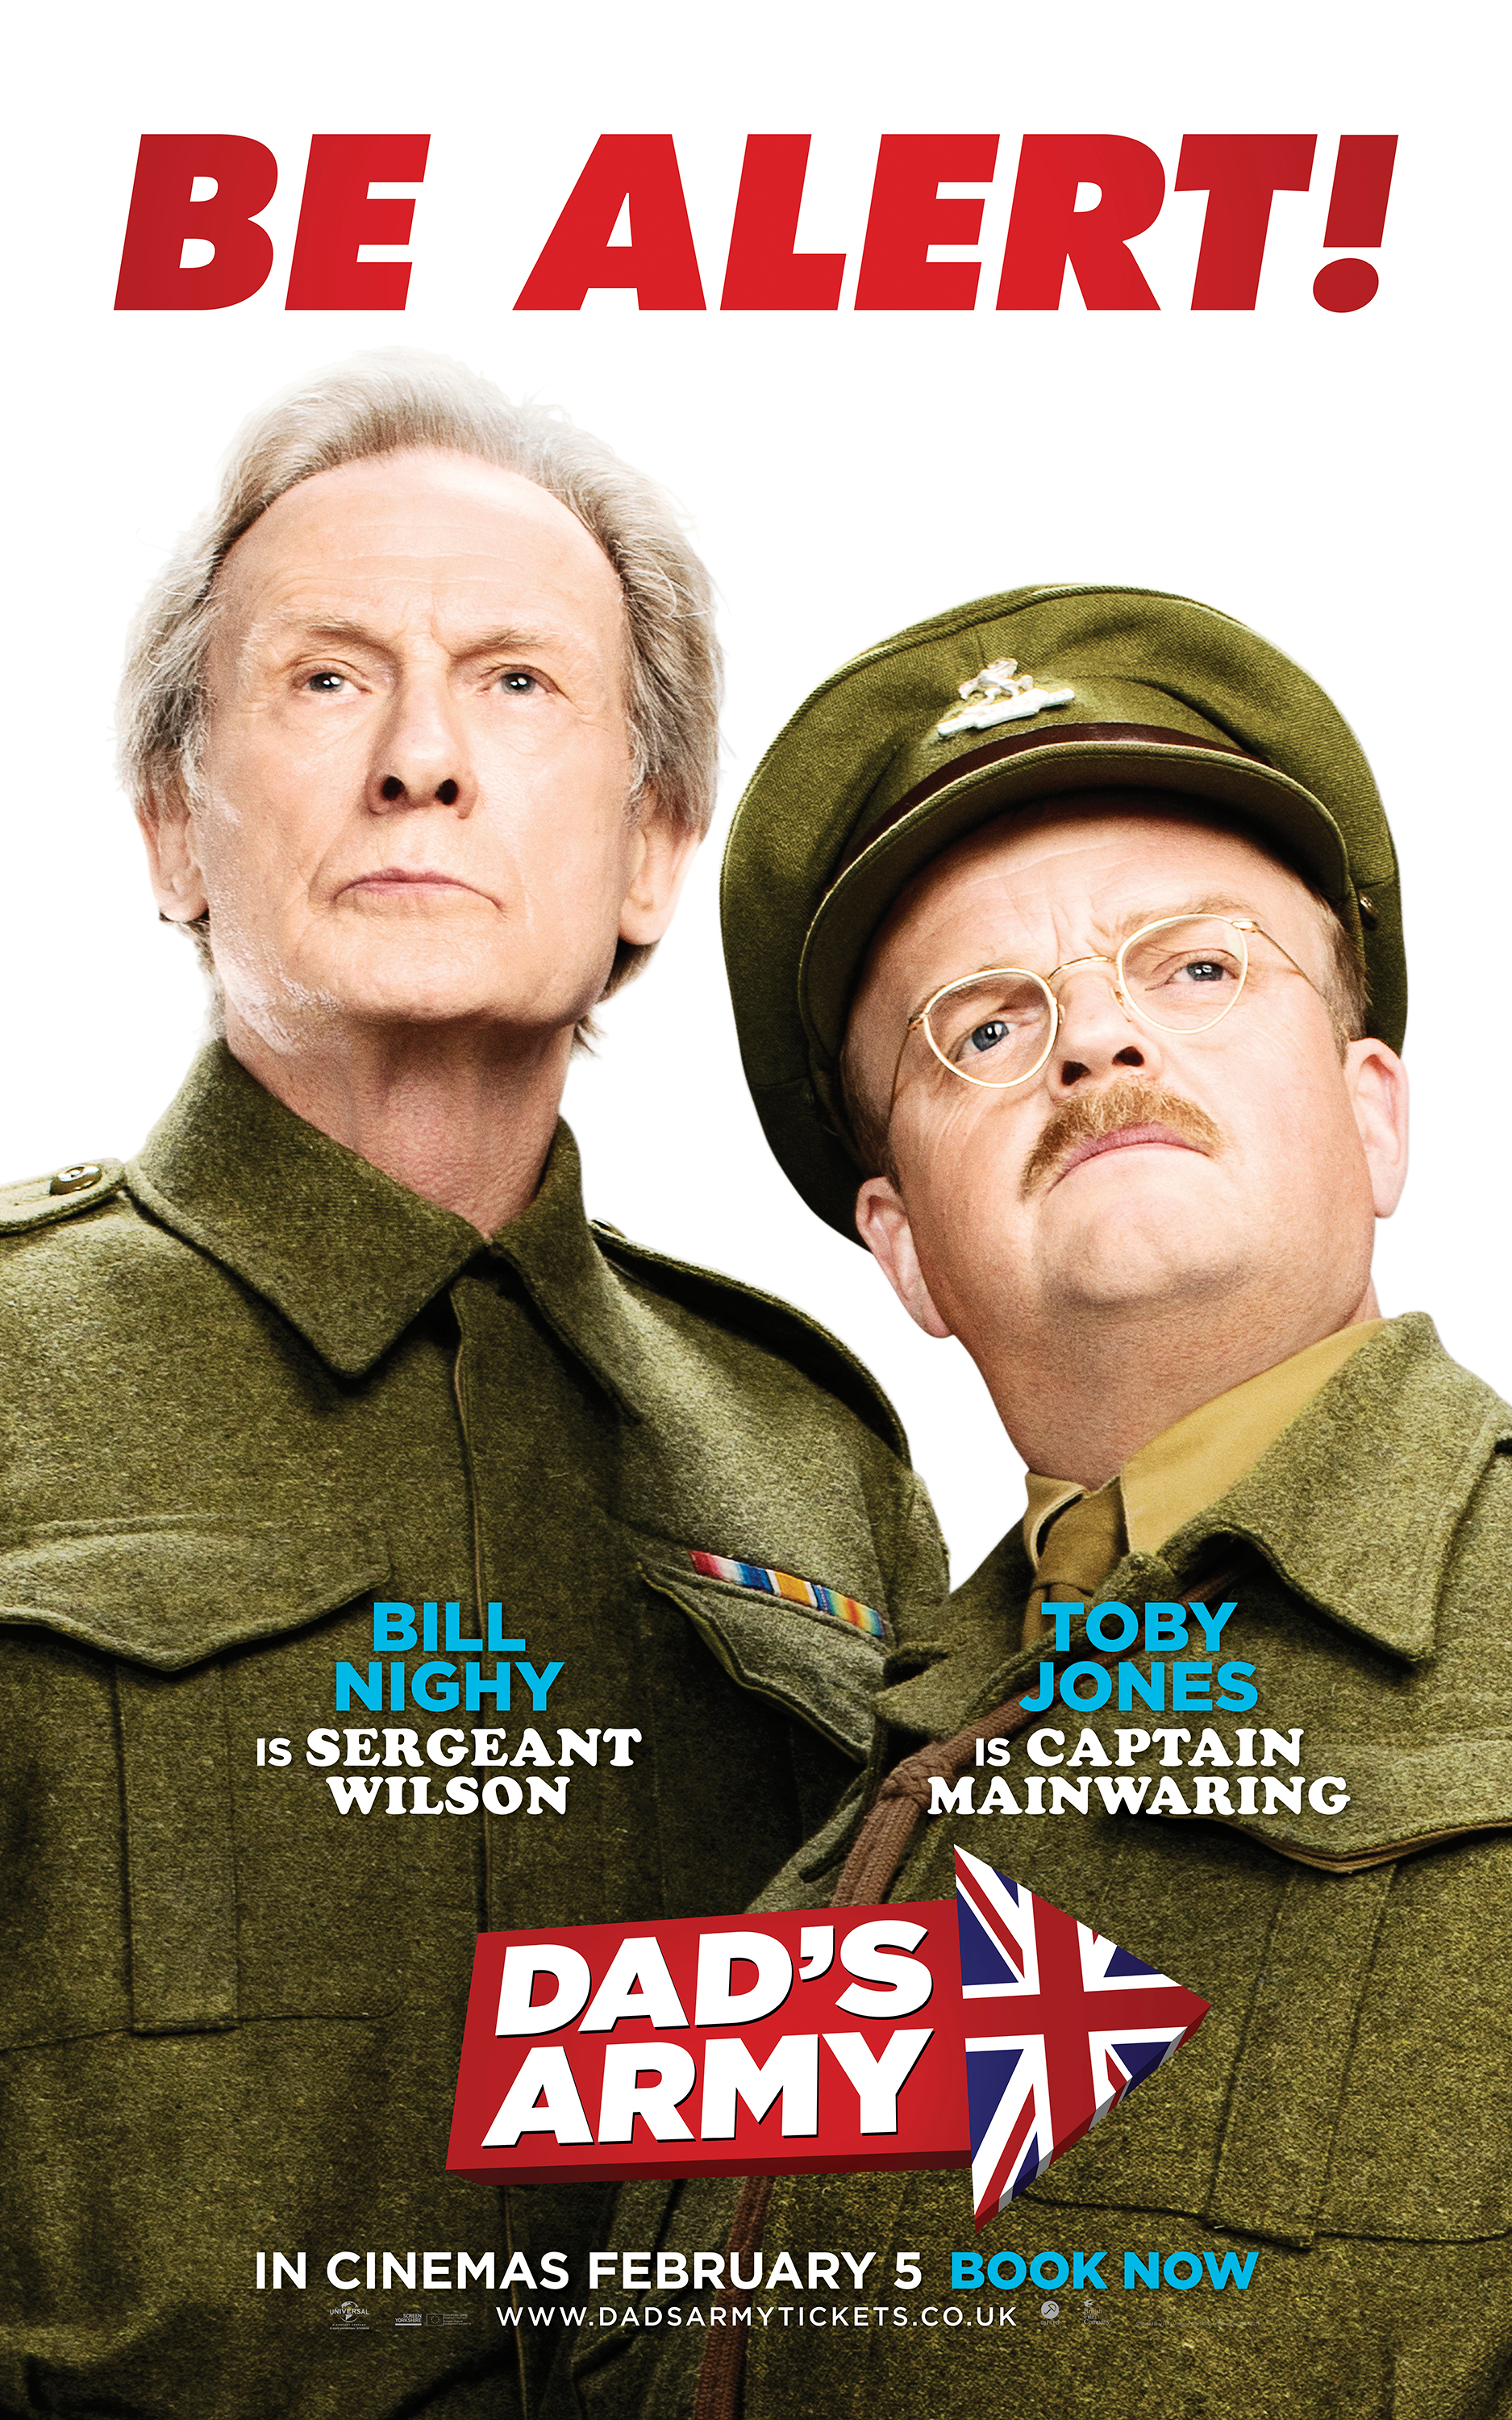 Uni-versal Extras was the dual extras agency for the Dad's Army feature film.